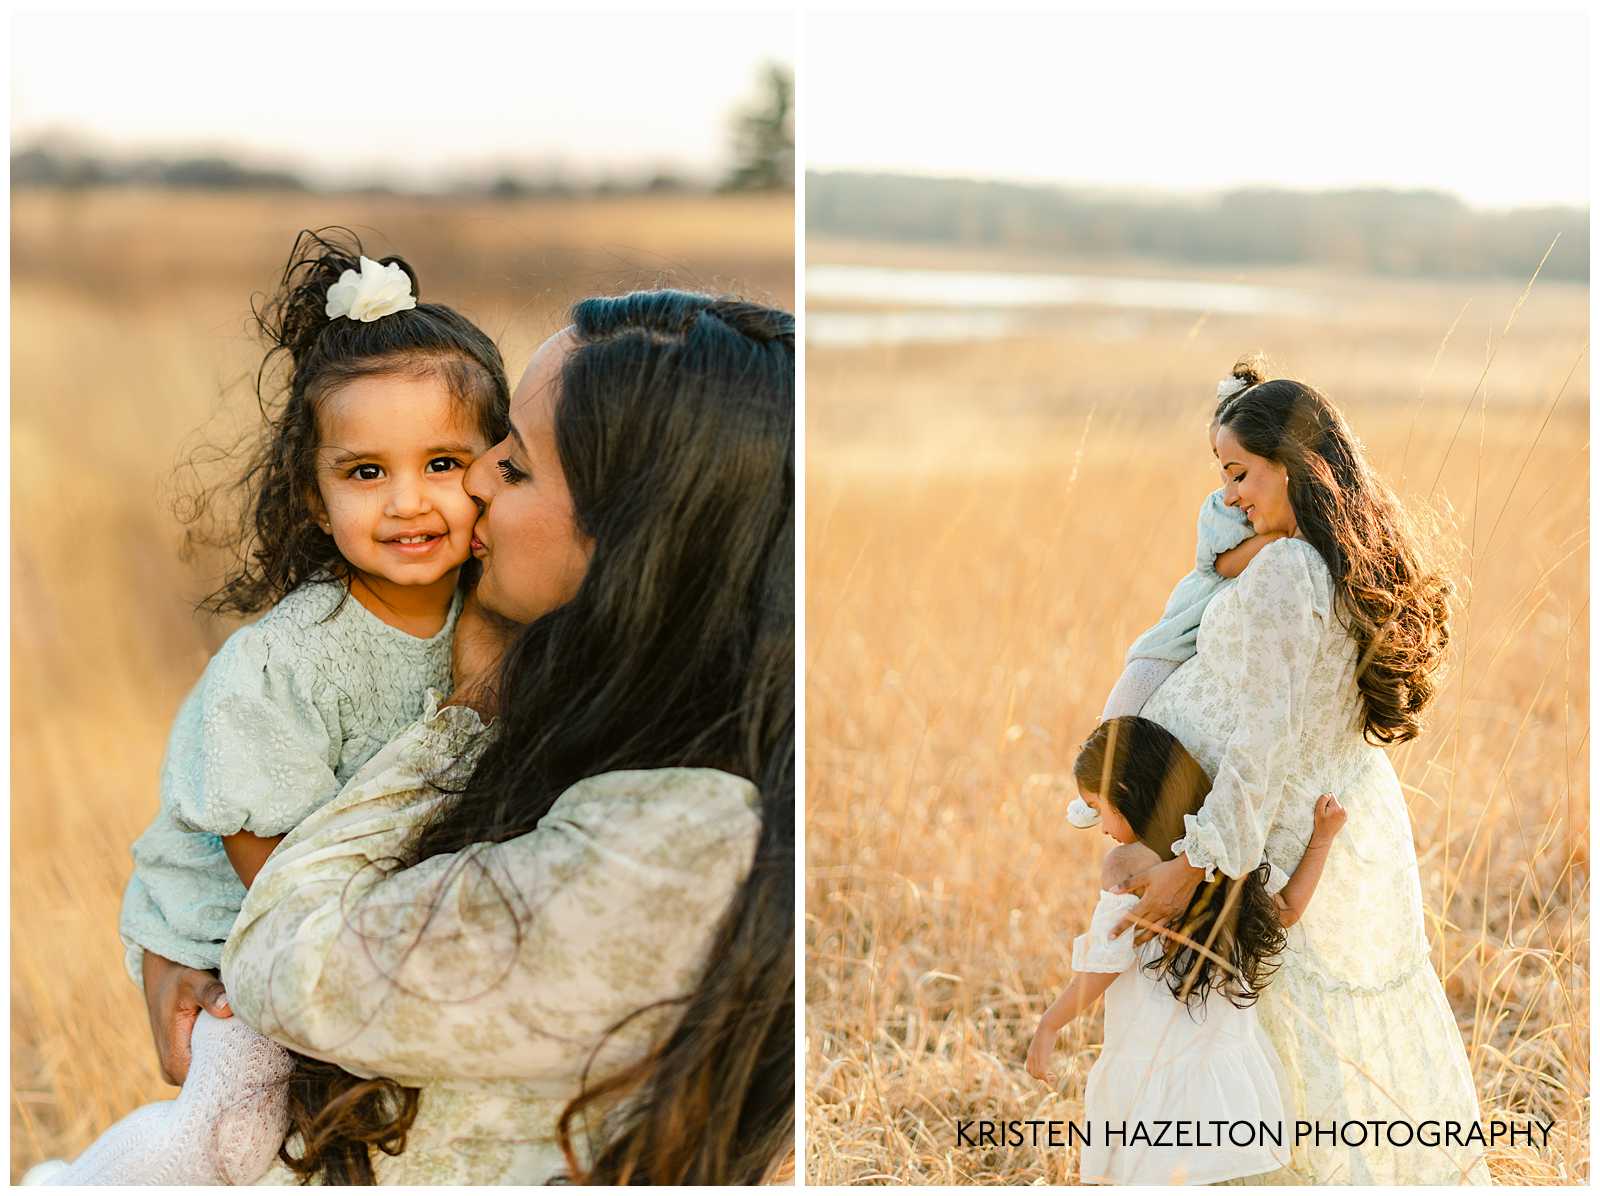 Mom hugging and kissing her toddler daughters in a grassy field. Winter photoshoot ideas by Kristen Hazelton